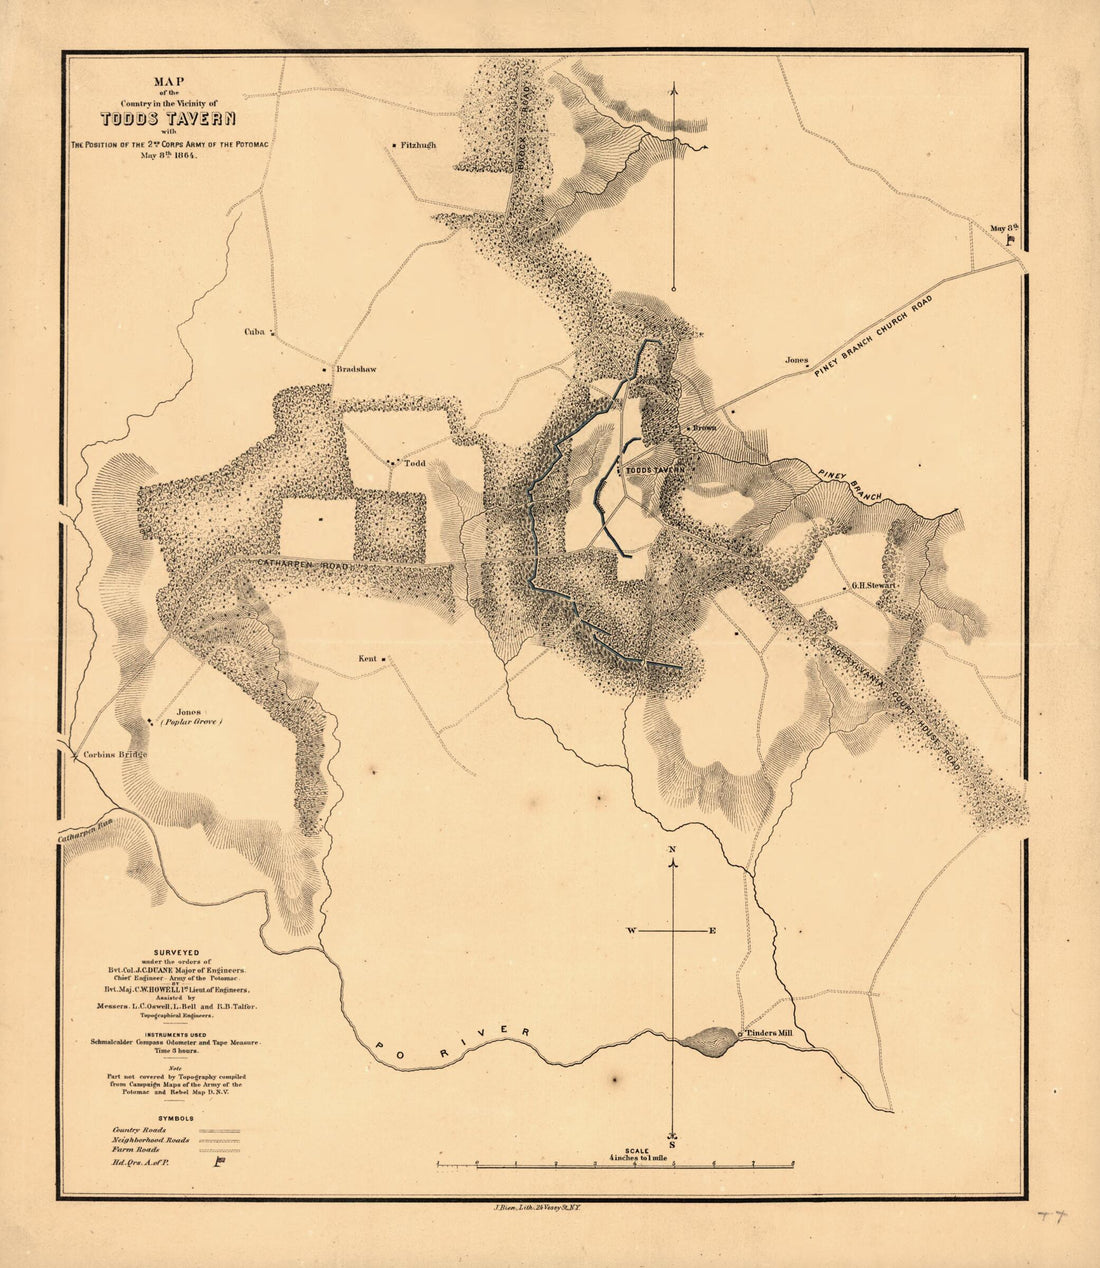 This old map of Map of the Country In the Vicinity of Todds Tavern, With the Position of the 2nd Corps Army of the Potomac, May 8th, 1864 (Country In the Vicinity of Todds Tavern, With the Position of the 2nd Corps Army of the Potomac, May 8th, 1864) fro